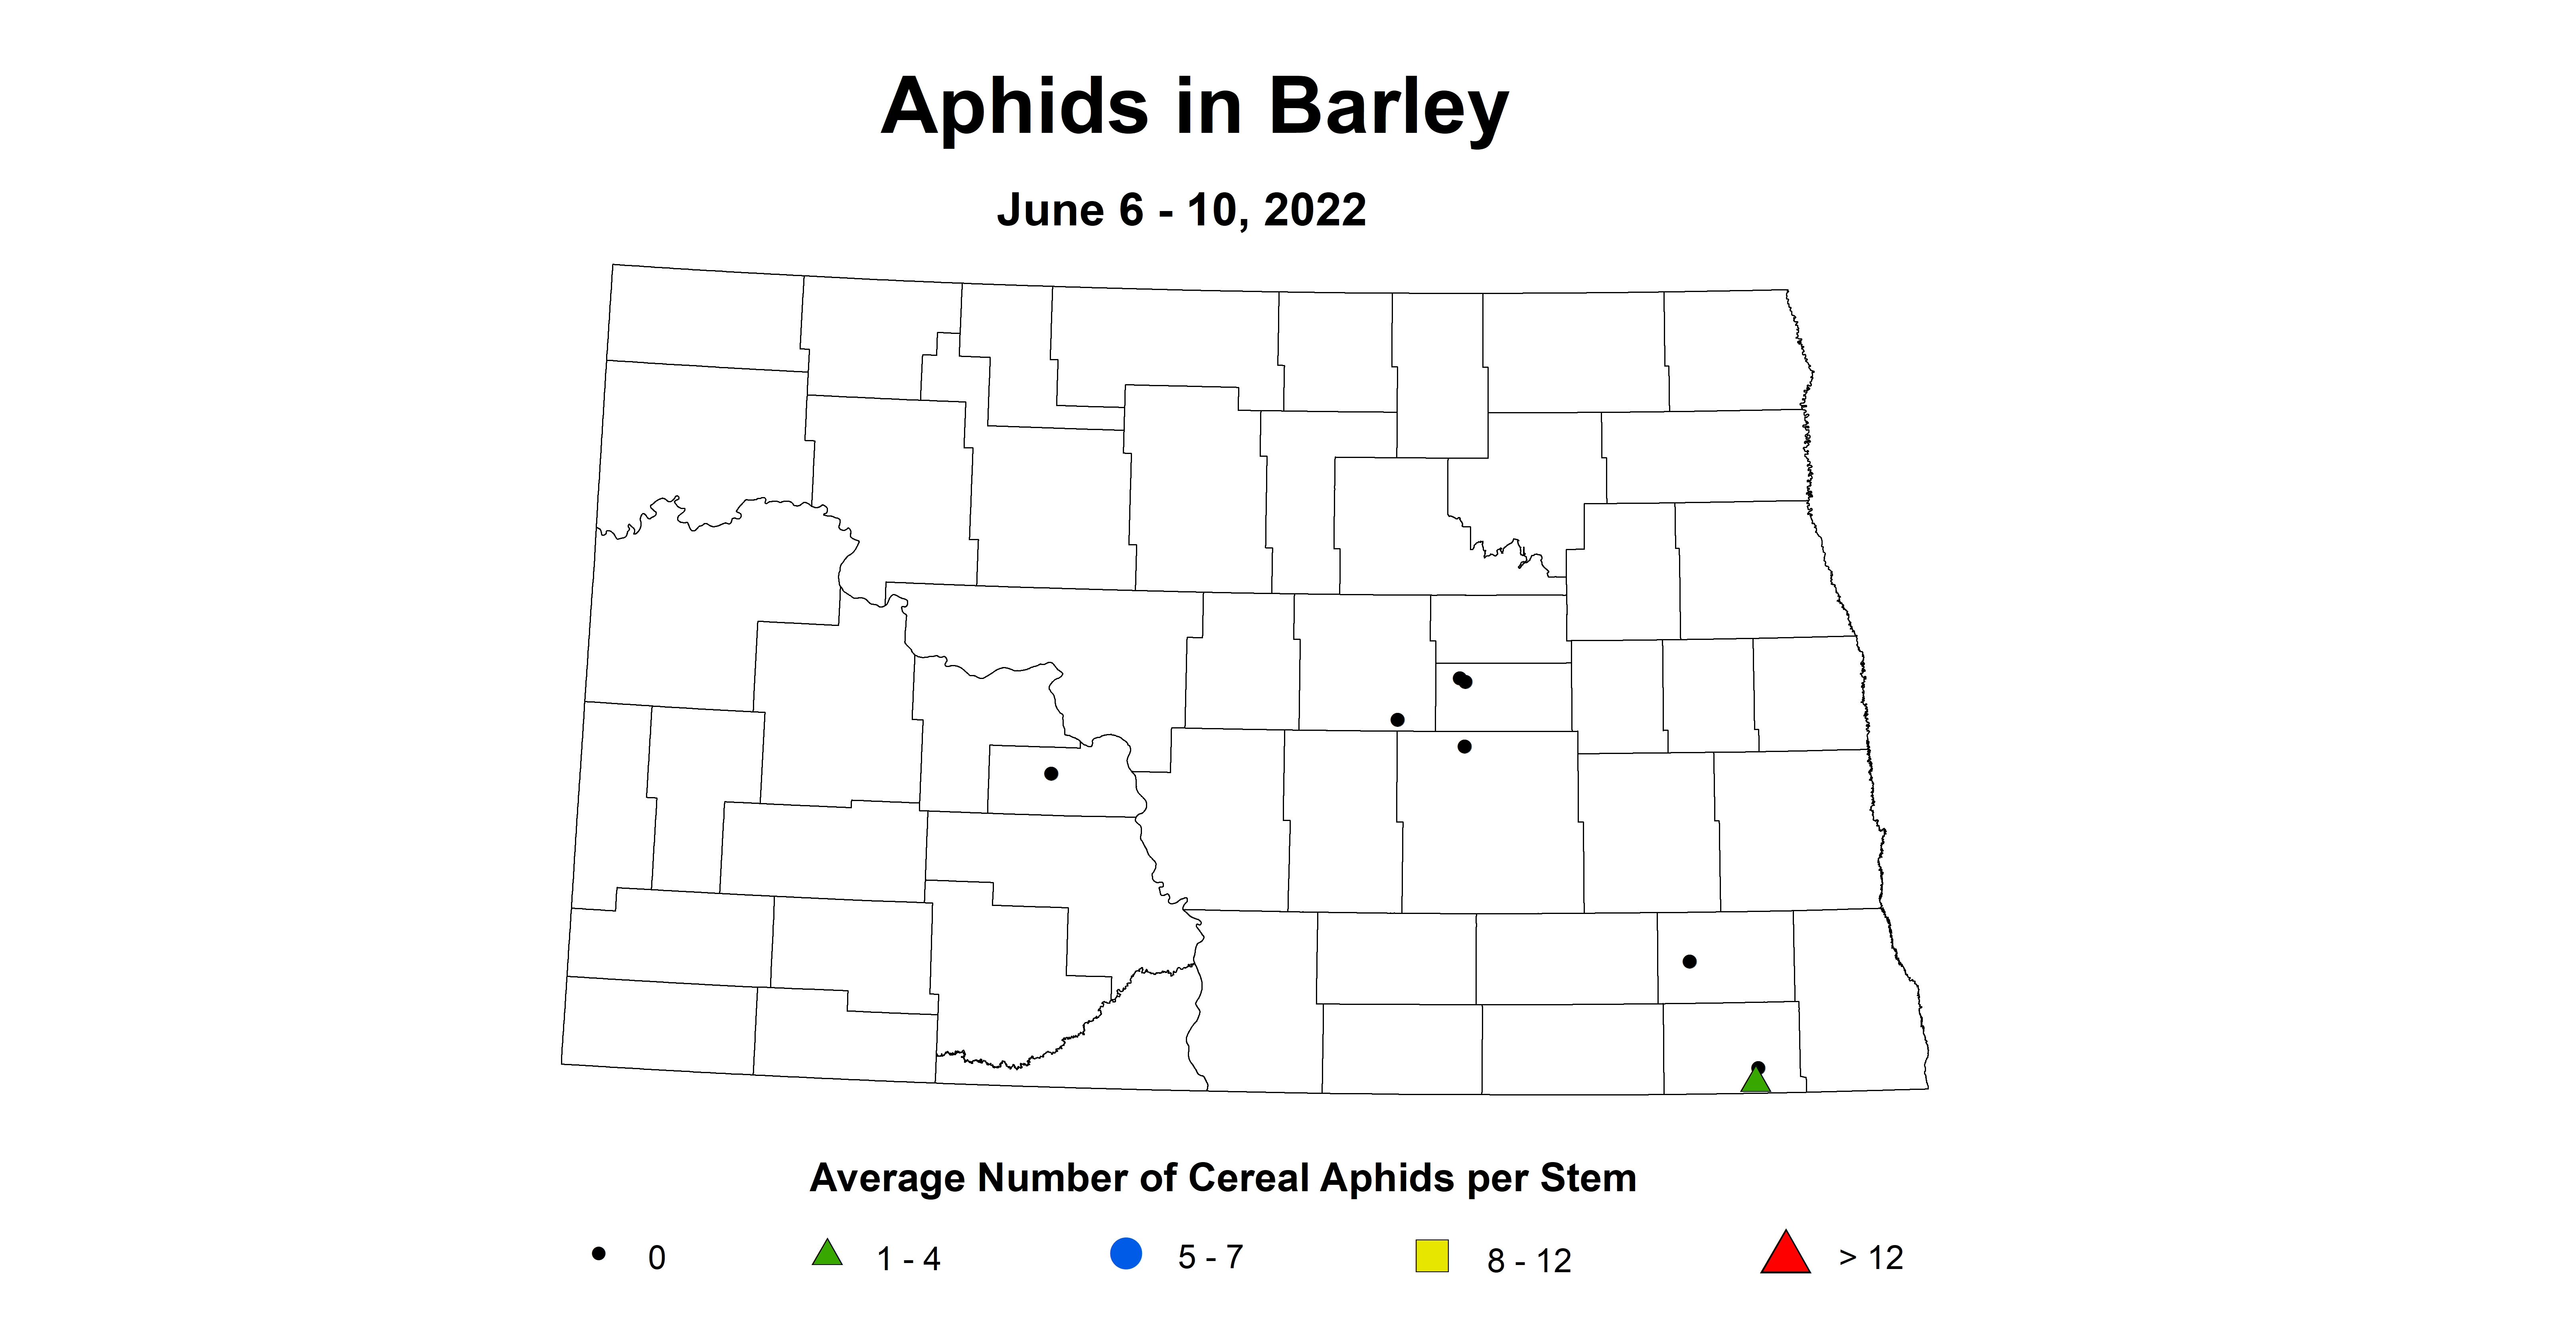 ND IPM map of Barley Aphids June 6-10, 2022